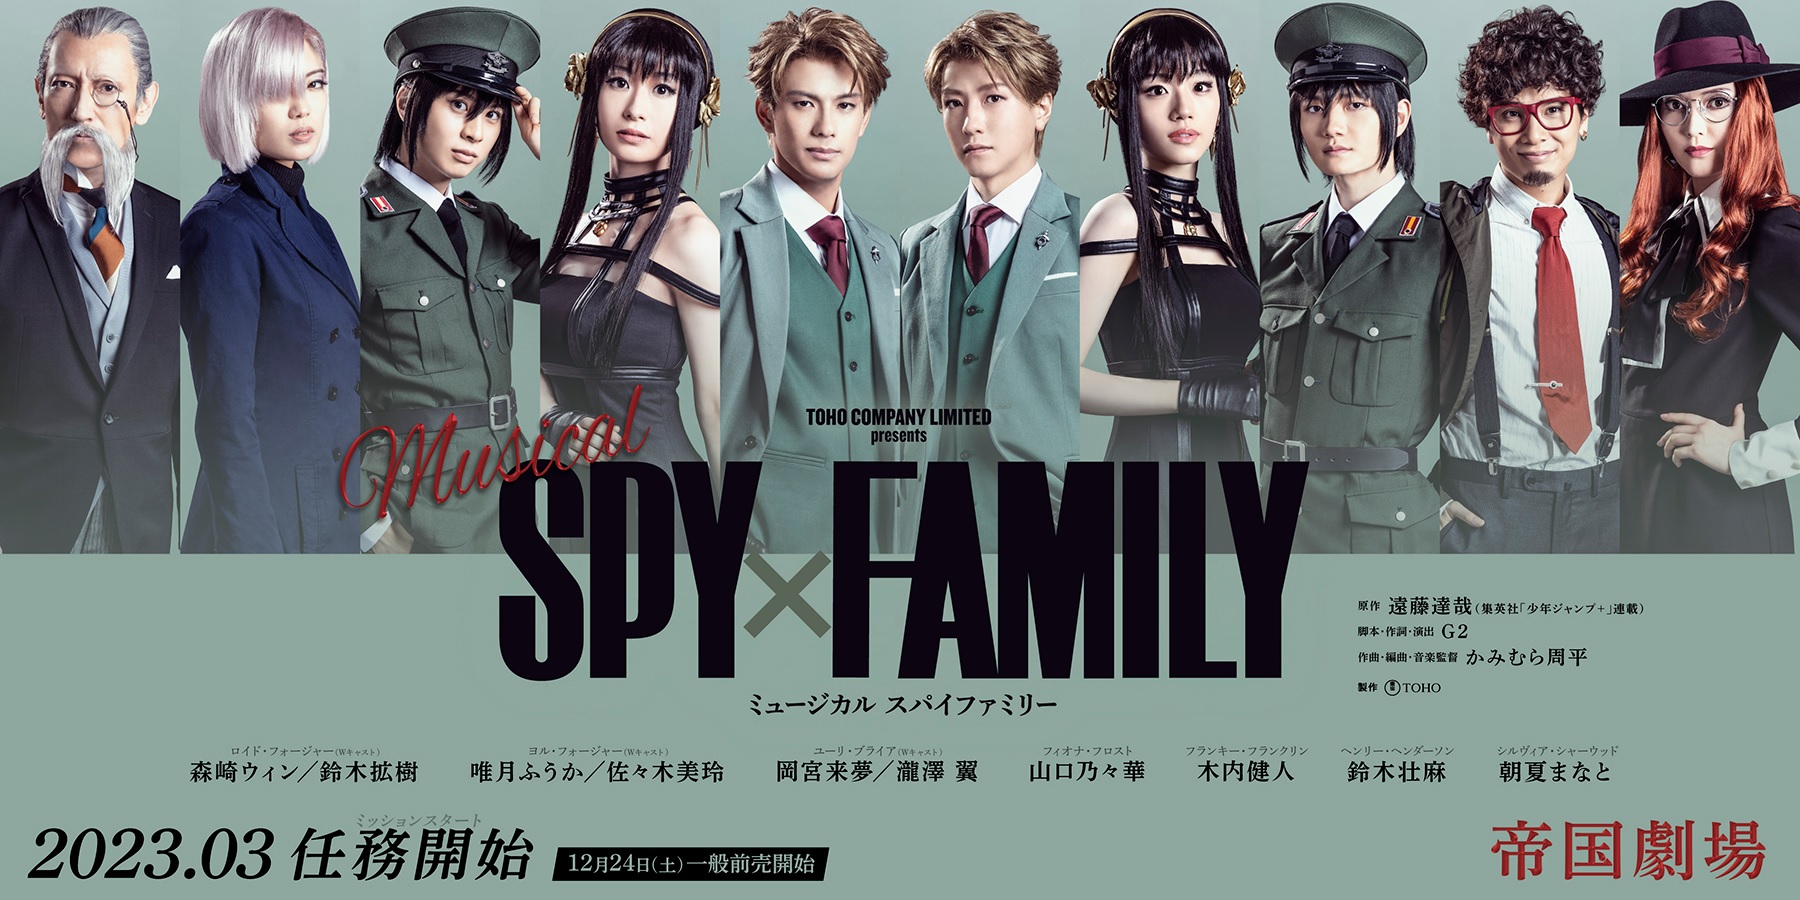 Spy x Family Releases Special Poster for Episode 8